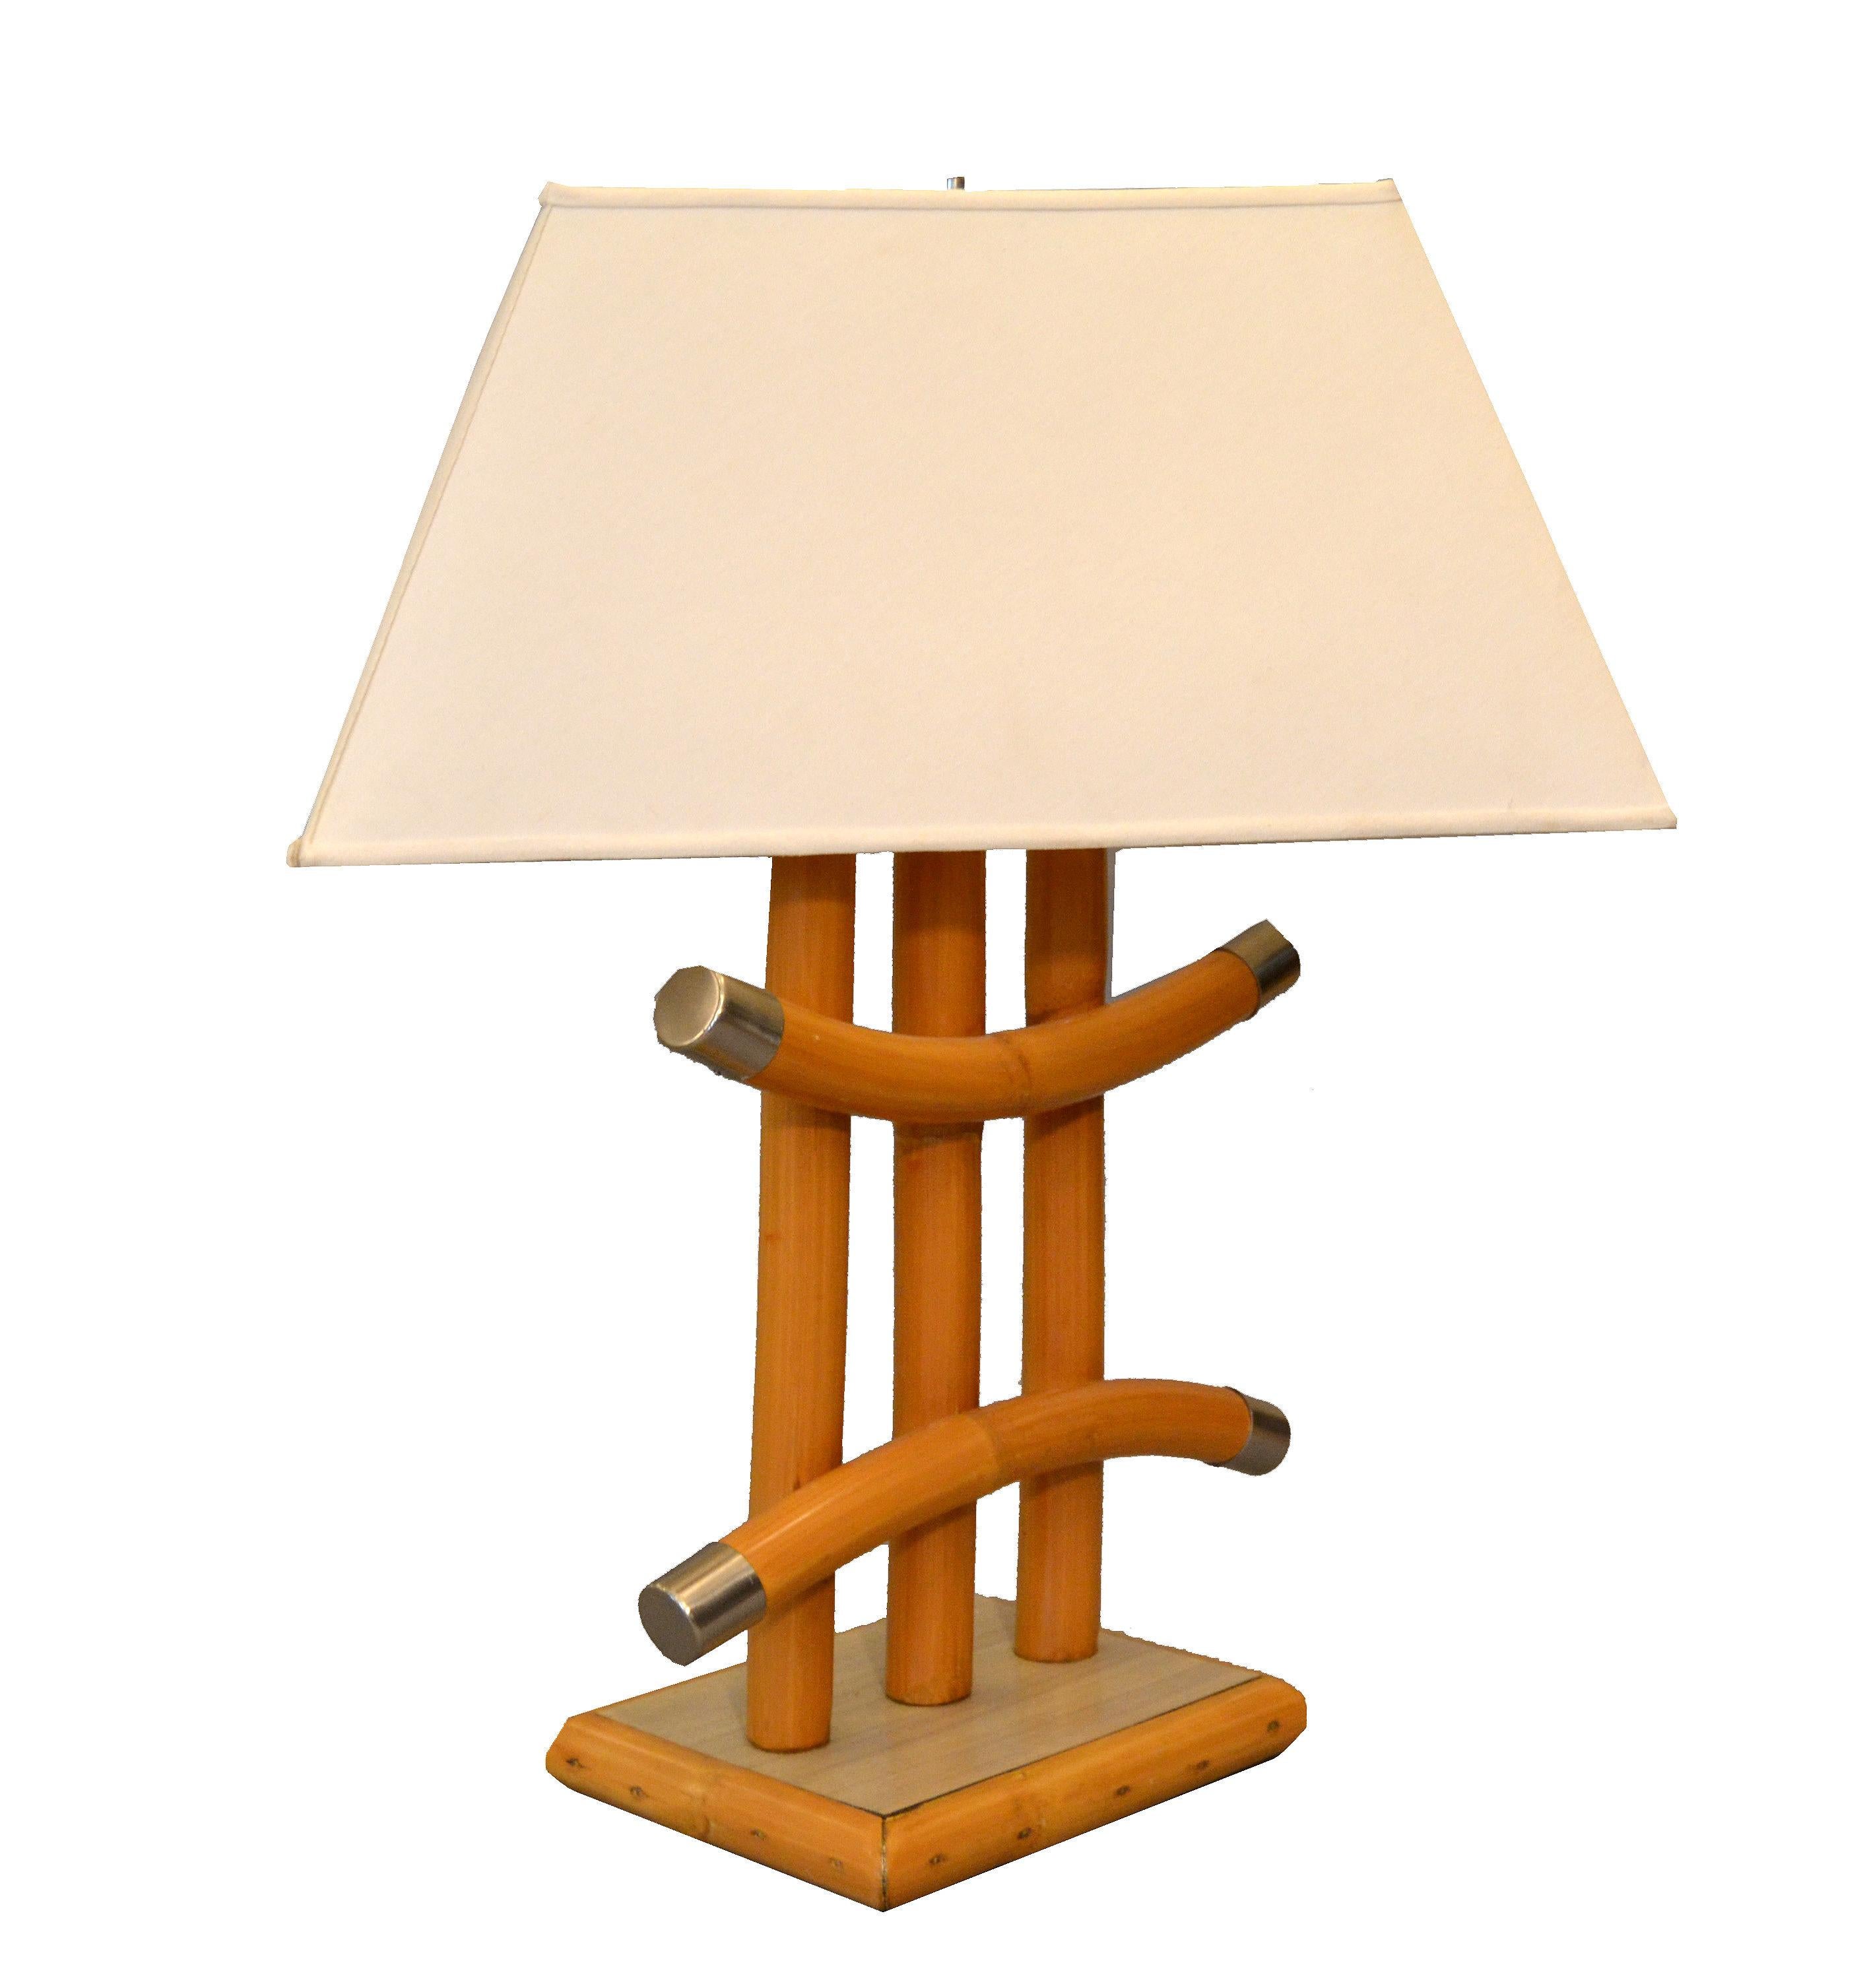 Mid-Century Modern Bohemian Chic handmade bent bamboo and rattan table lamp.
The original Off-White Shade is included.
Looks great from every angle and it is ready for any Tropical Living Space.